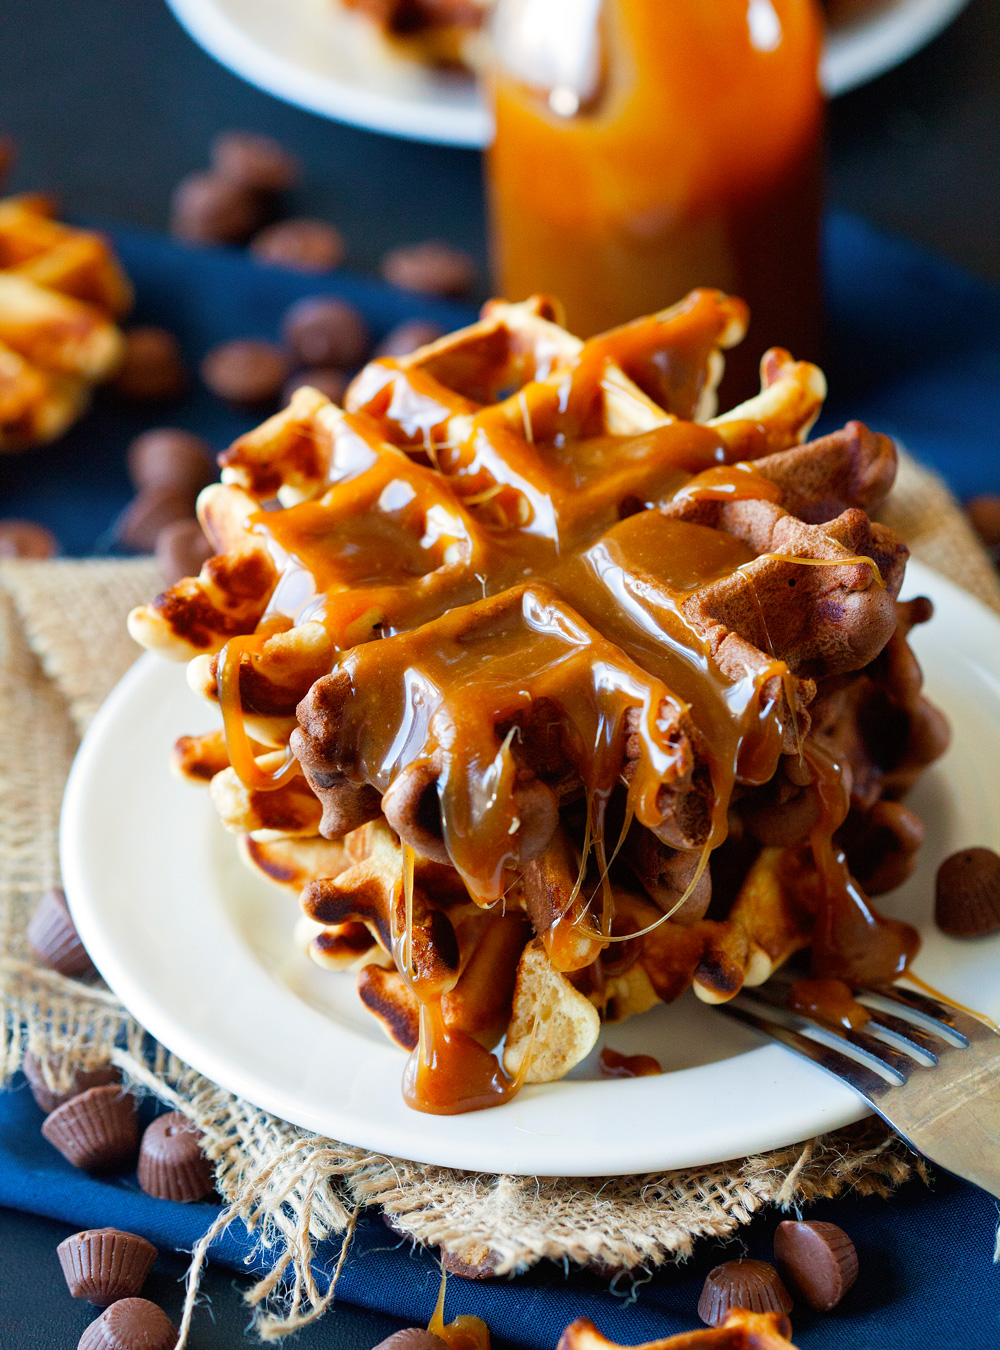 Peanut Butter Cup Doughnut Waffles by Deliciously Yum